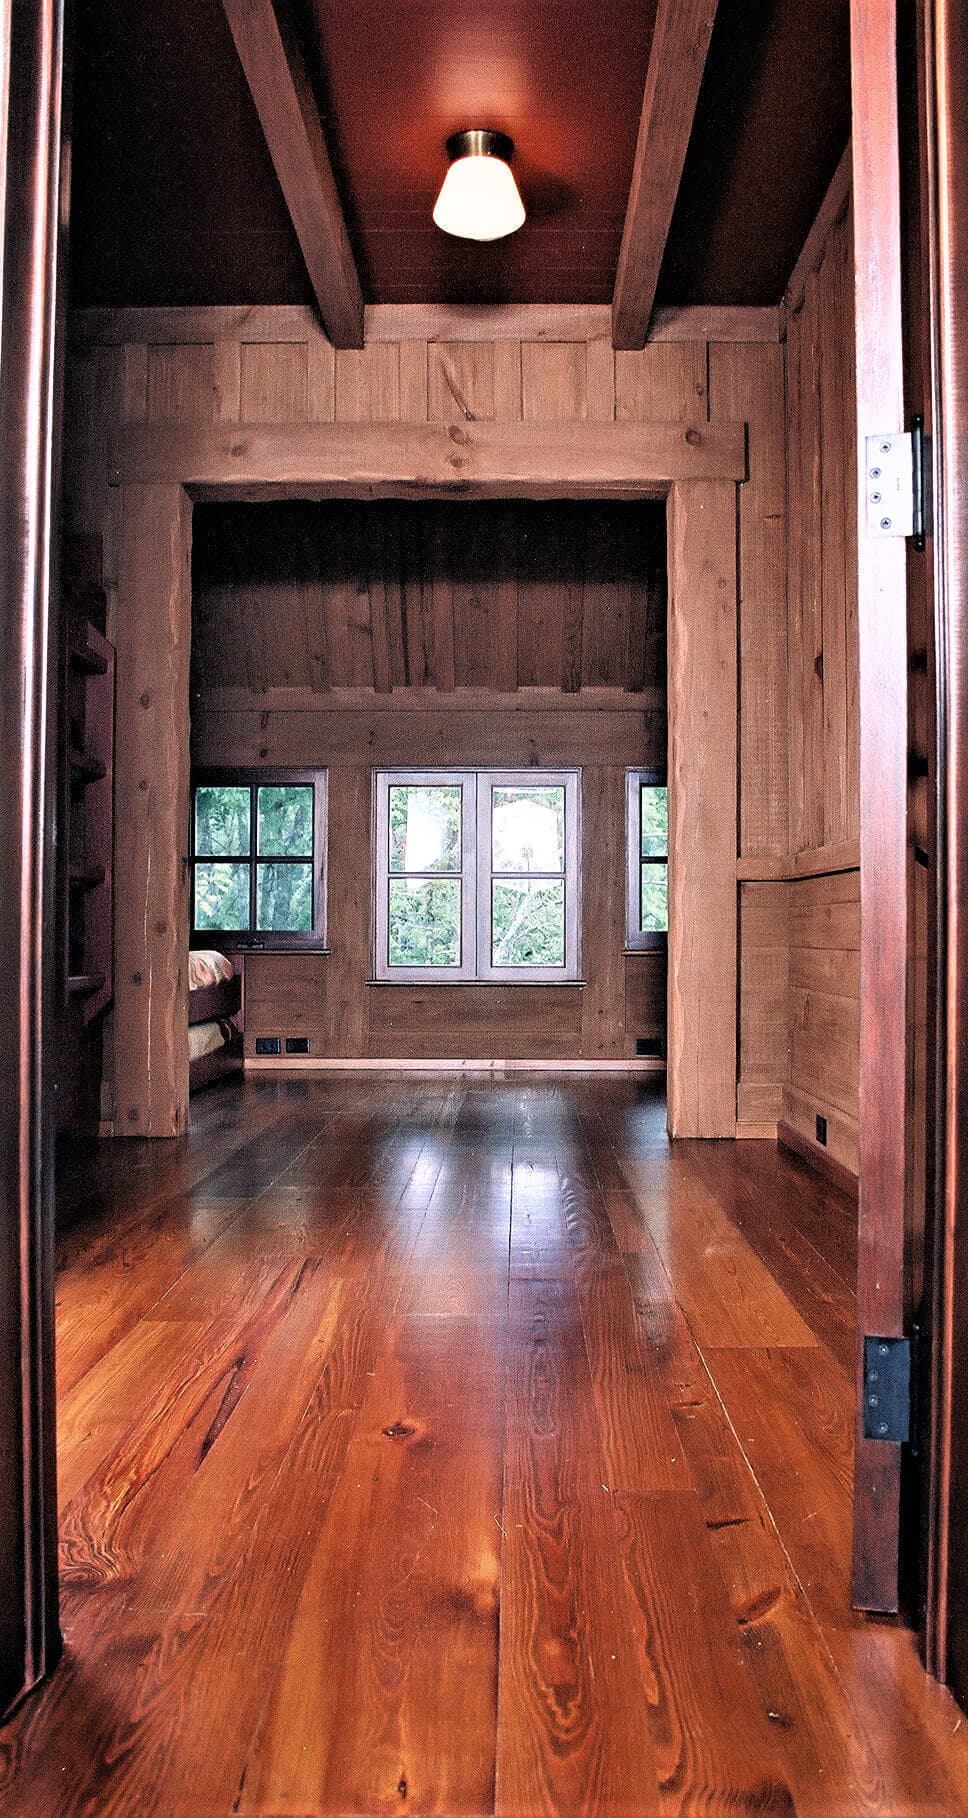 Antique heart pine flooring window view in Lake Toxaway NC